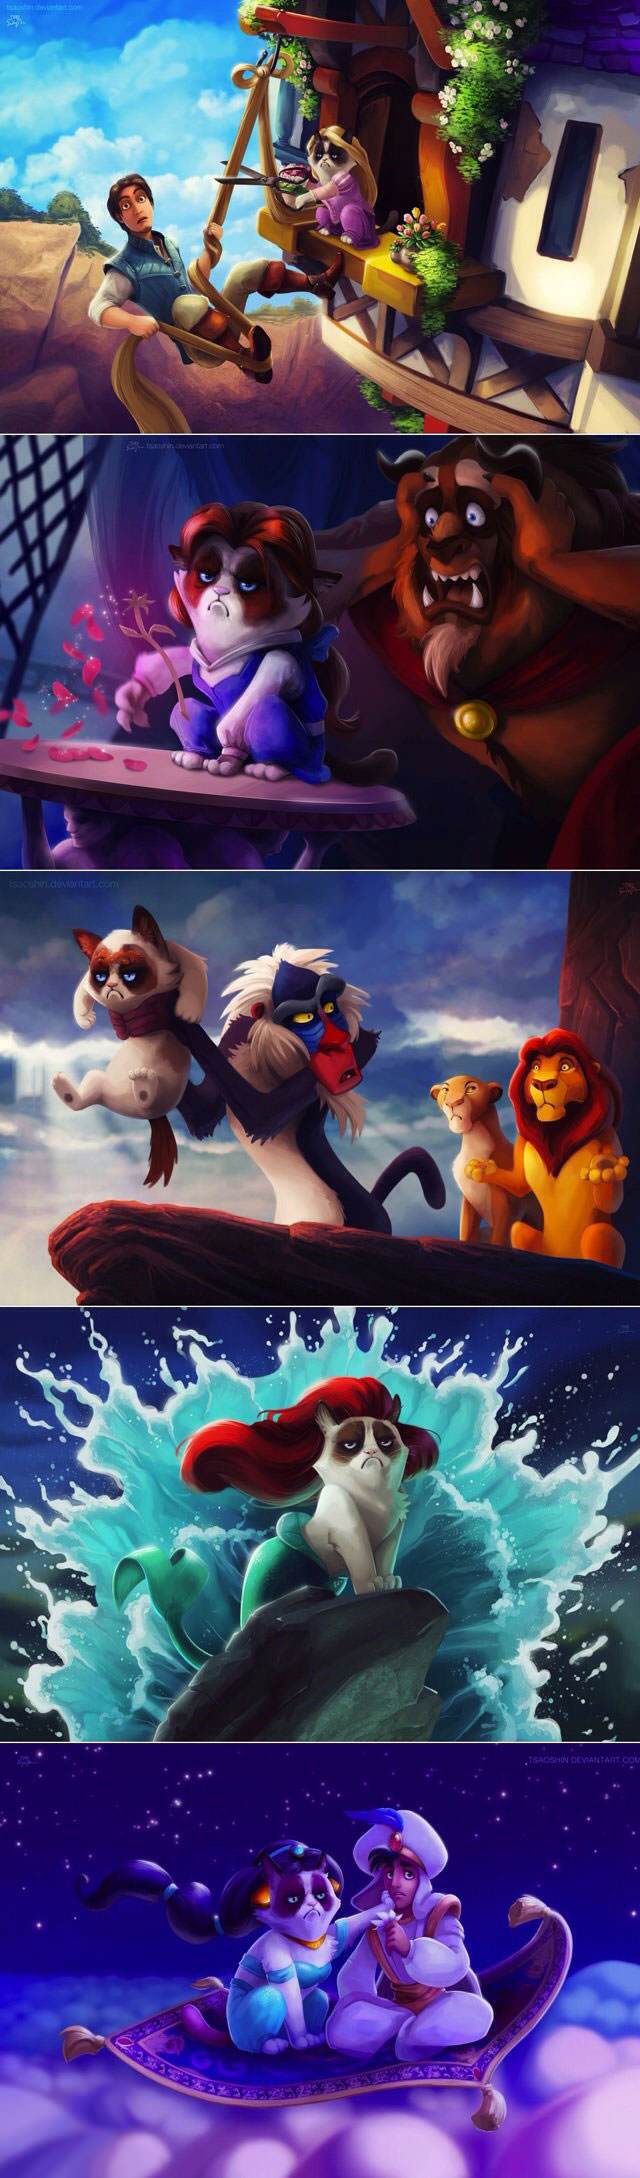 grumpy cat if he were the main character in disney movies